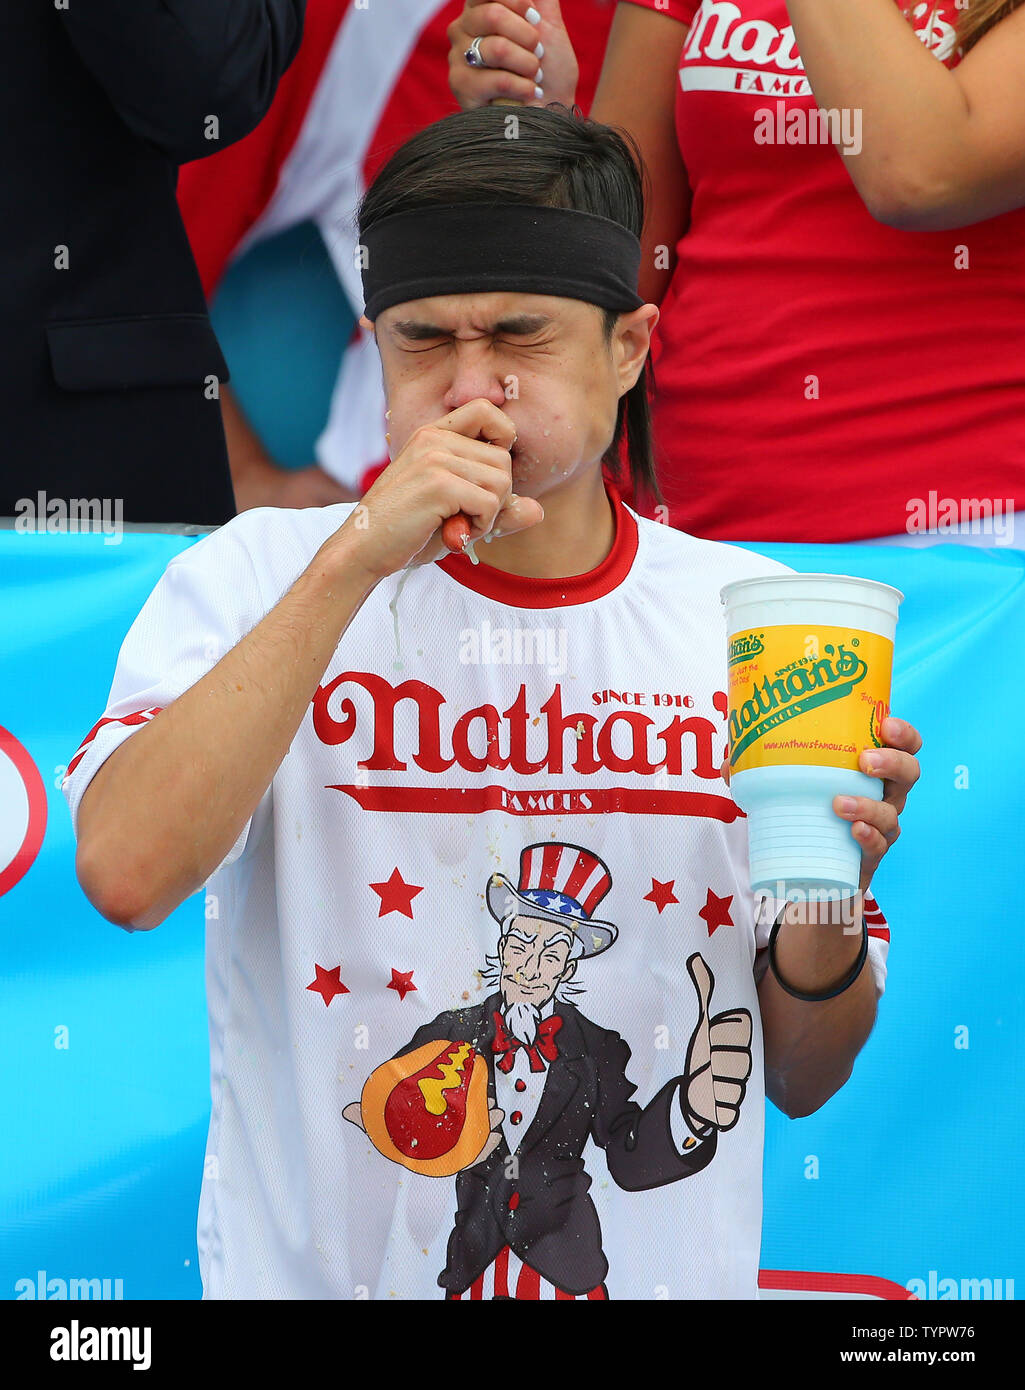 Matt Stonie competes at the Nathan's Famous Fourth of July International Hot  Dog Eating Contest in Coney Island, NY on July 4, 2015. The Nathan's Famous  Fourth of July International Hot Dog